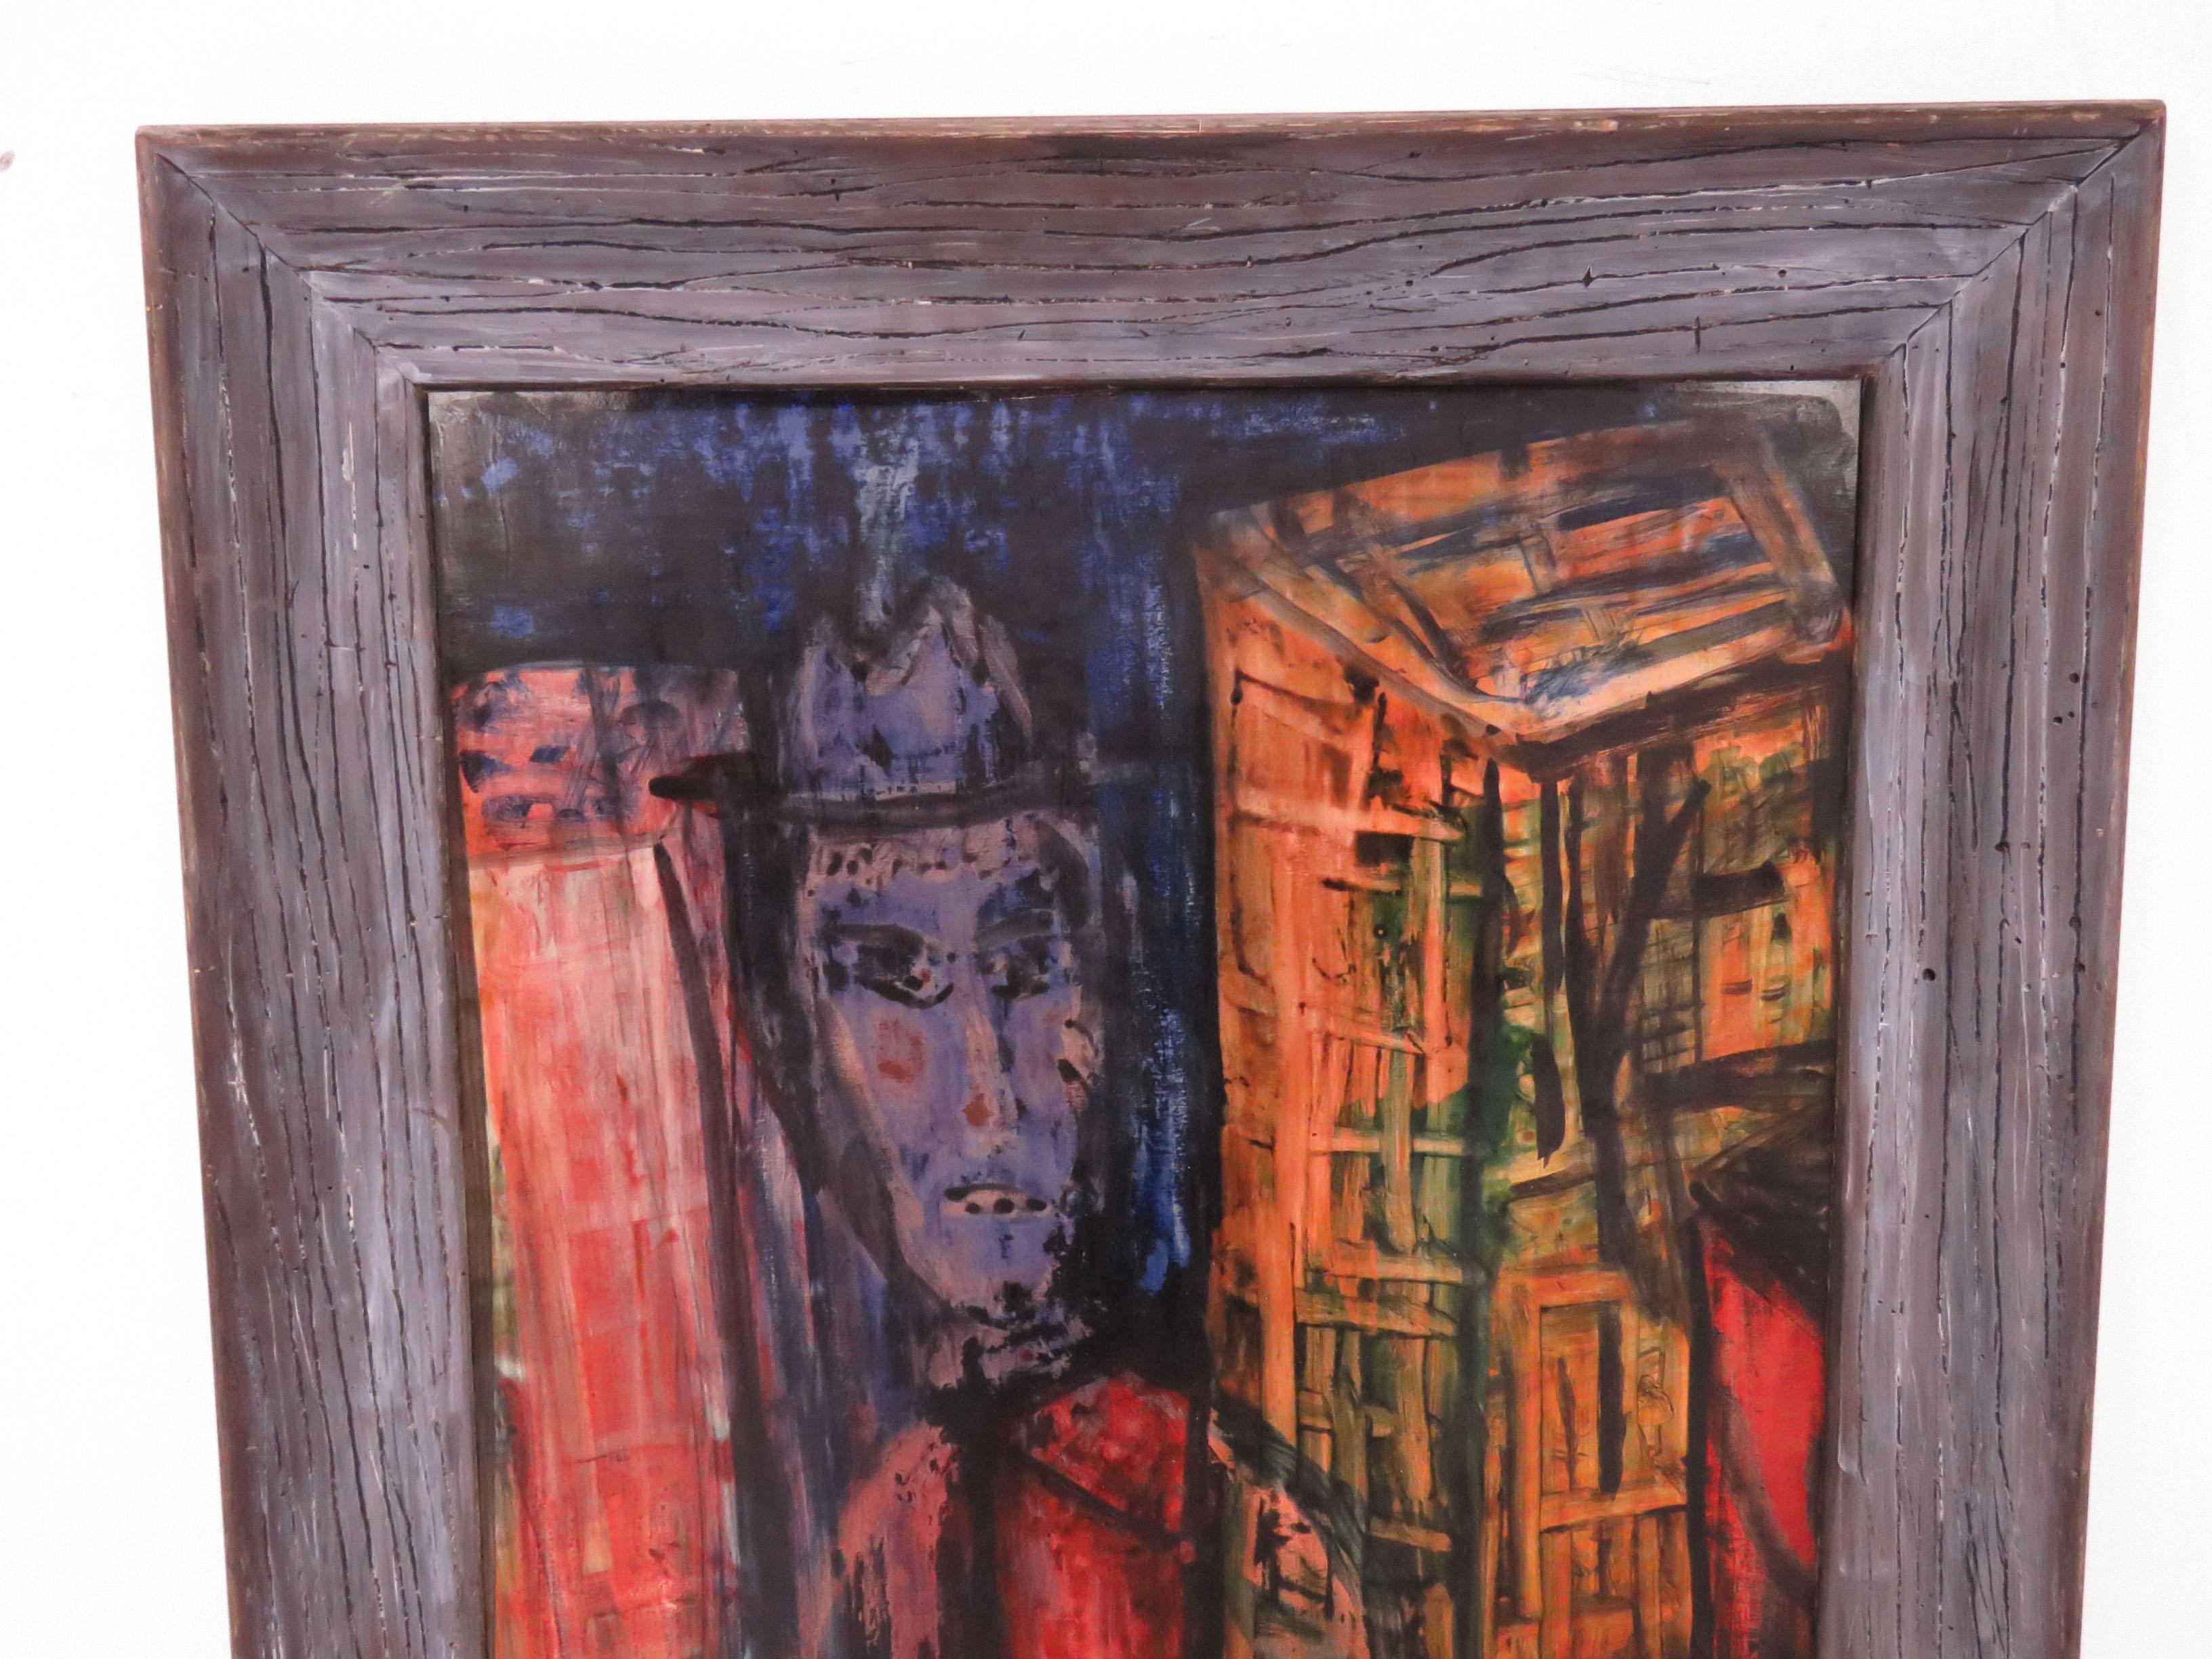 A 1950s beat generation urban portrait of a man in a fedora, resembling the author William S. Burroughs. An audacious palette depicting the neon soaked colors of nightlife, set in original period limed oak frame. Measures 29” wide, 33.5” high.